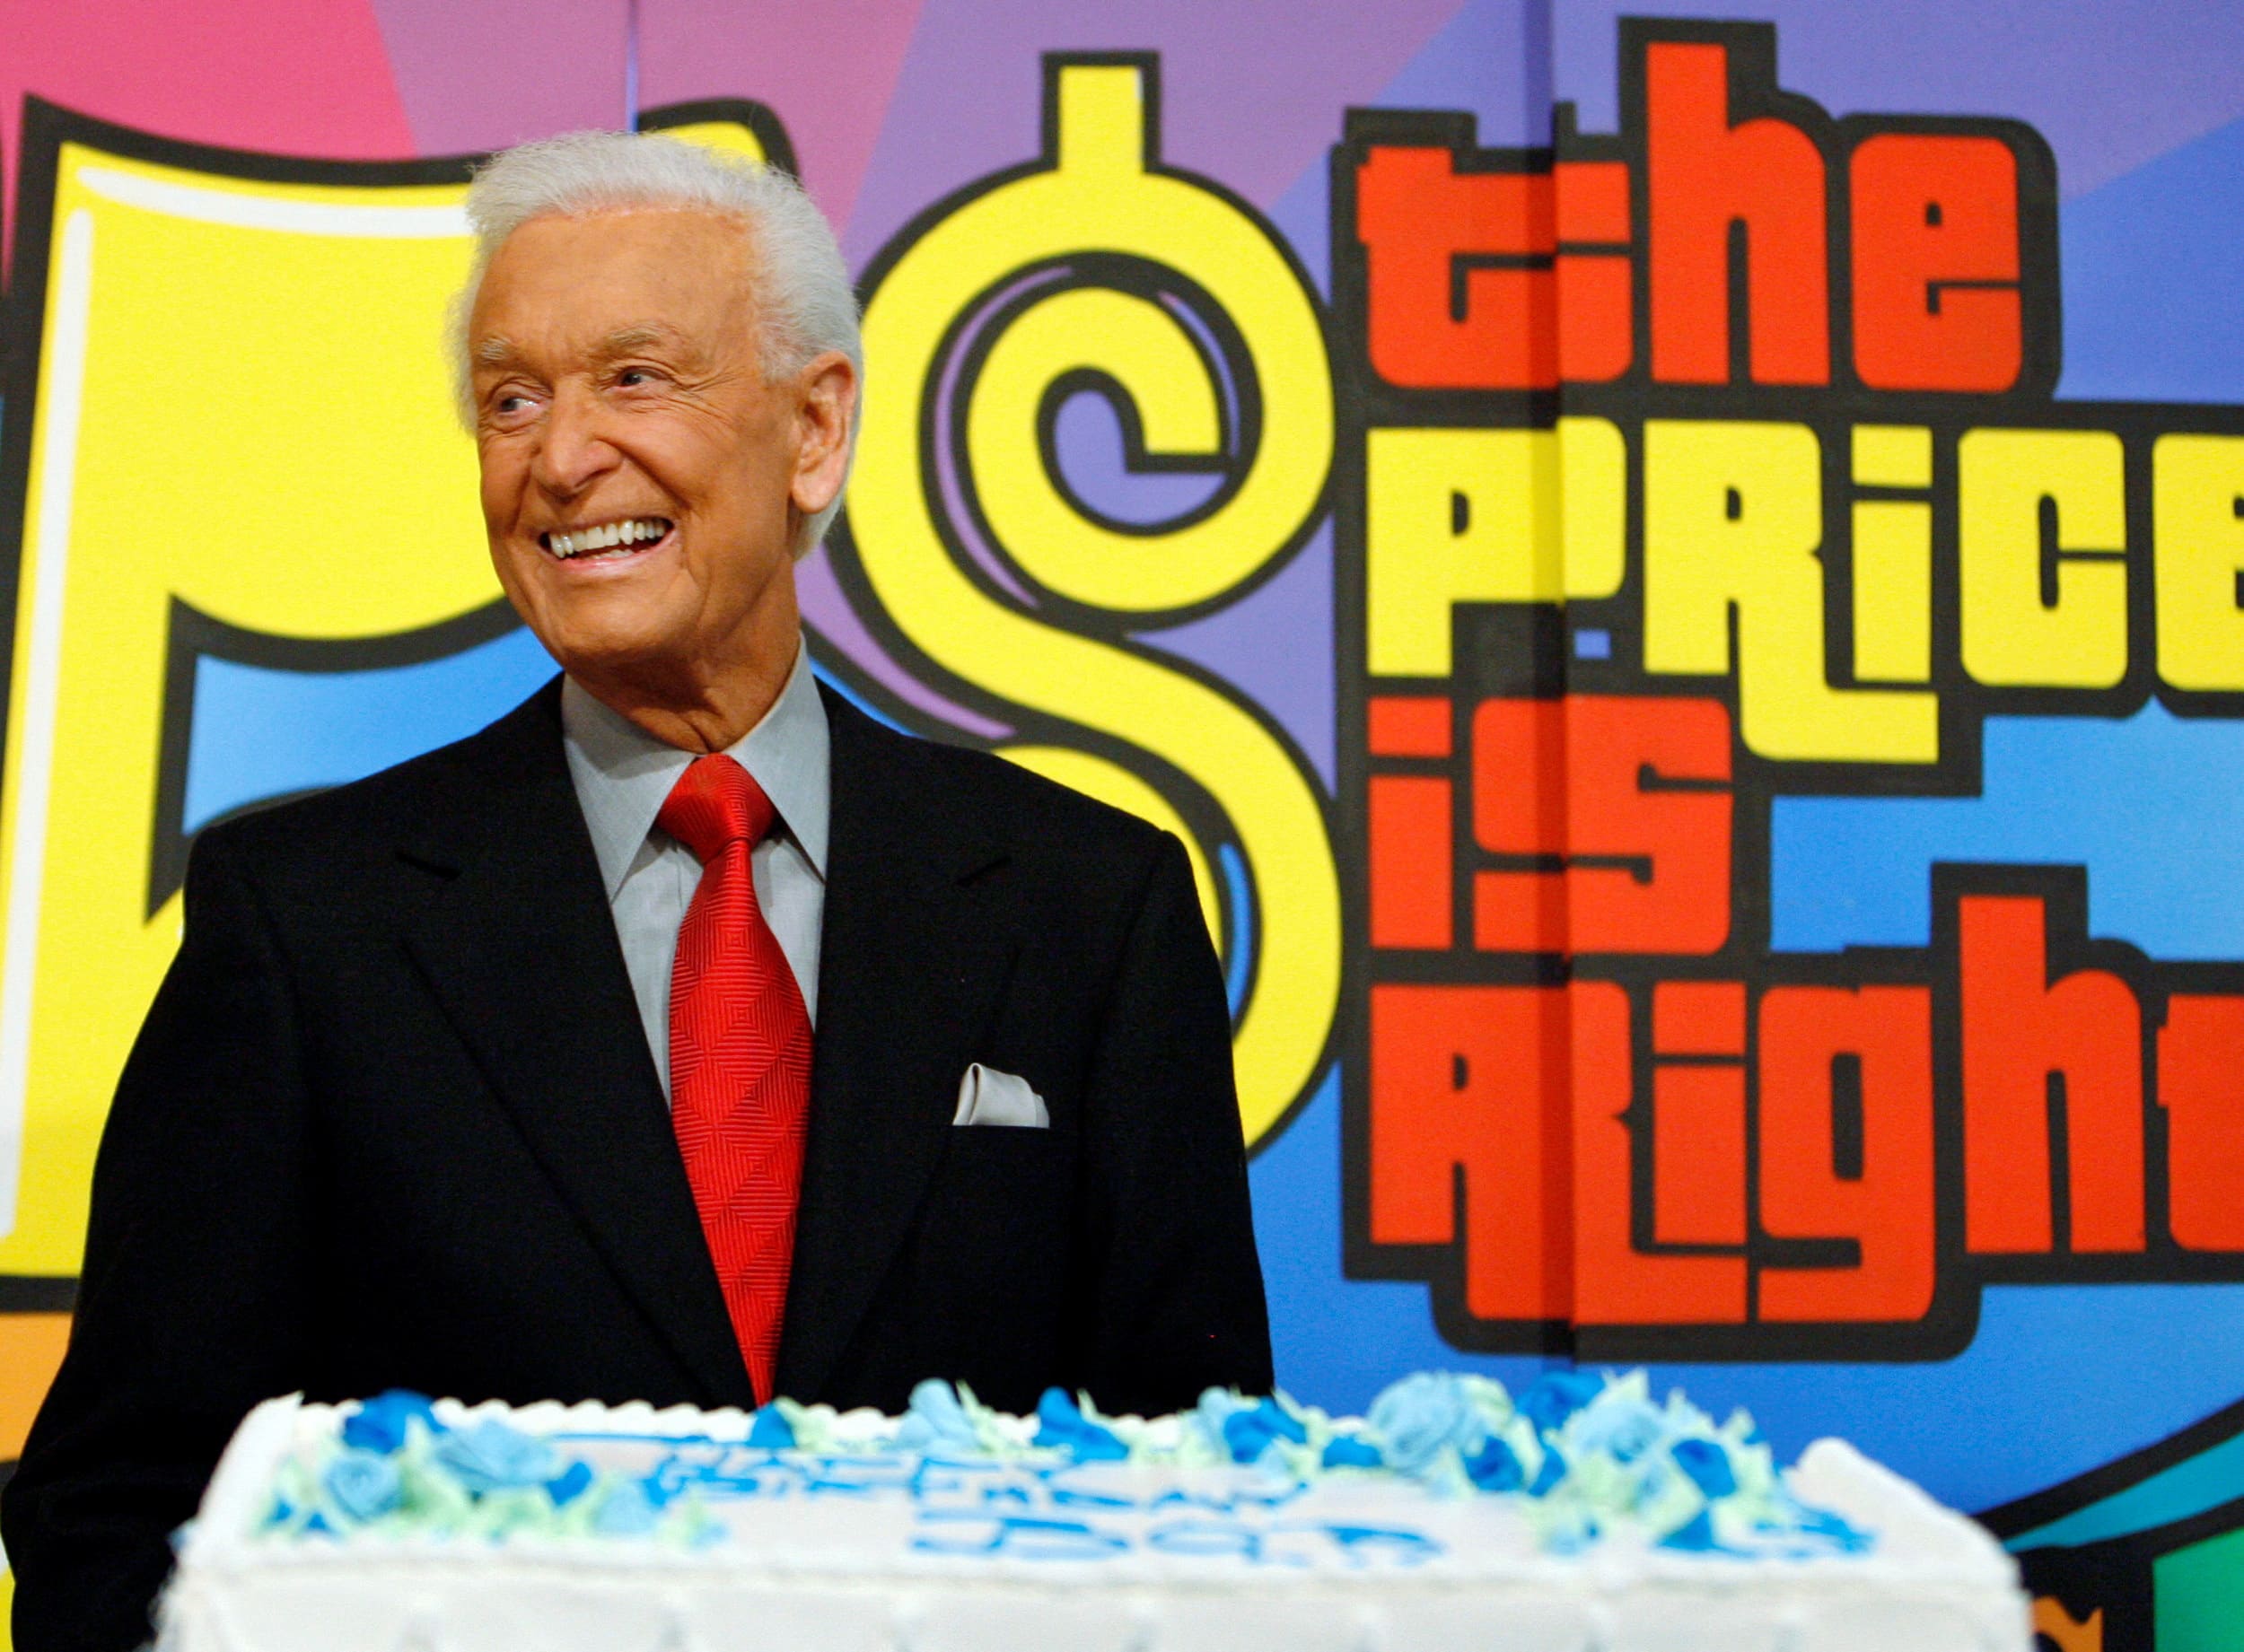 Bob Barker The Price is Right